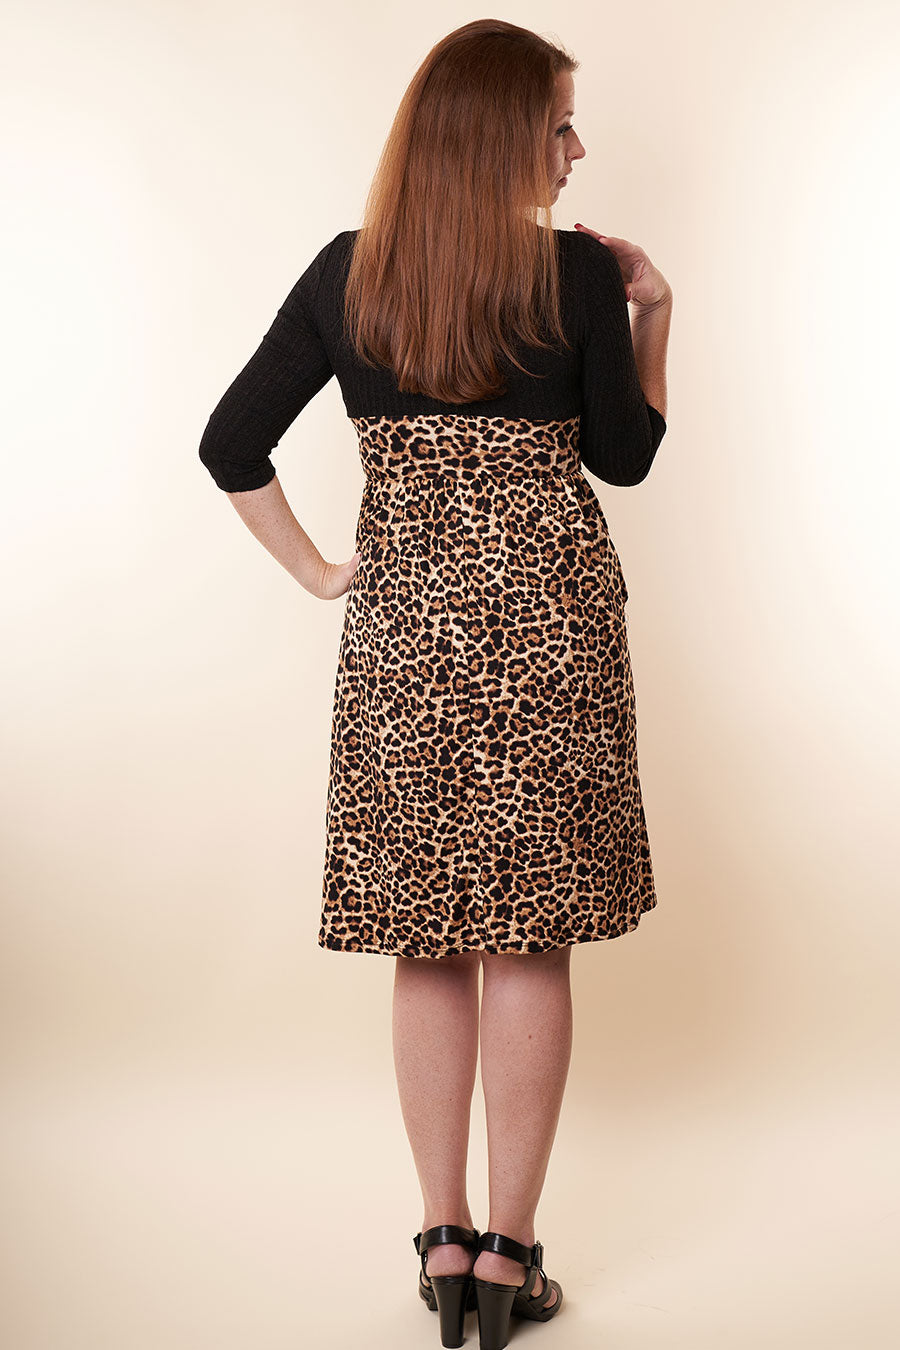 Picture Perfect Animal Print Dress Back